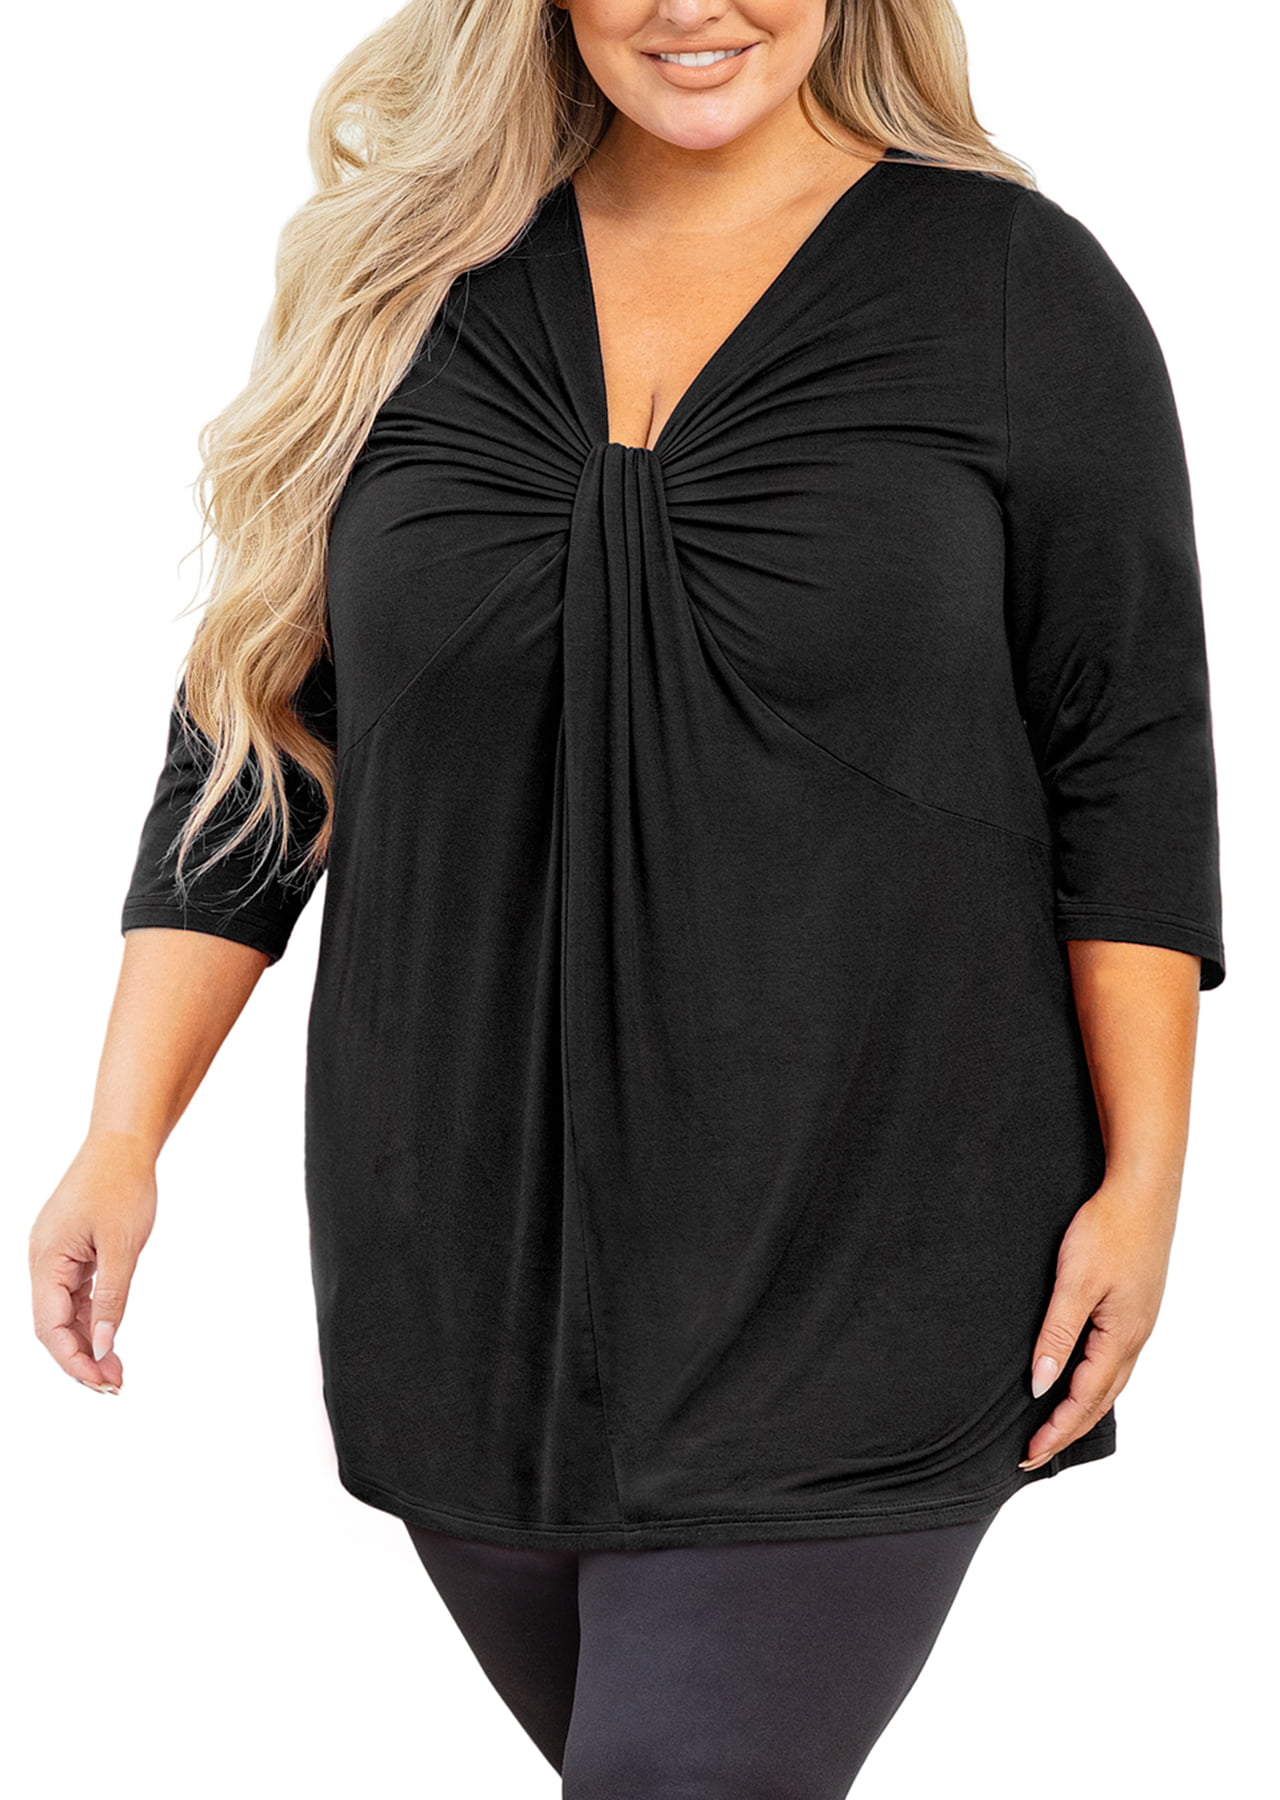 POPYOUNG Women's Plus Tunic 3/4 Sleeve Twist Knot Front Top V Neck Loose Fitting Casual T-Shirt Black 10W -